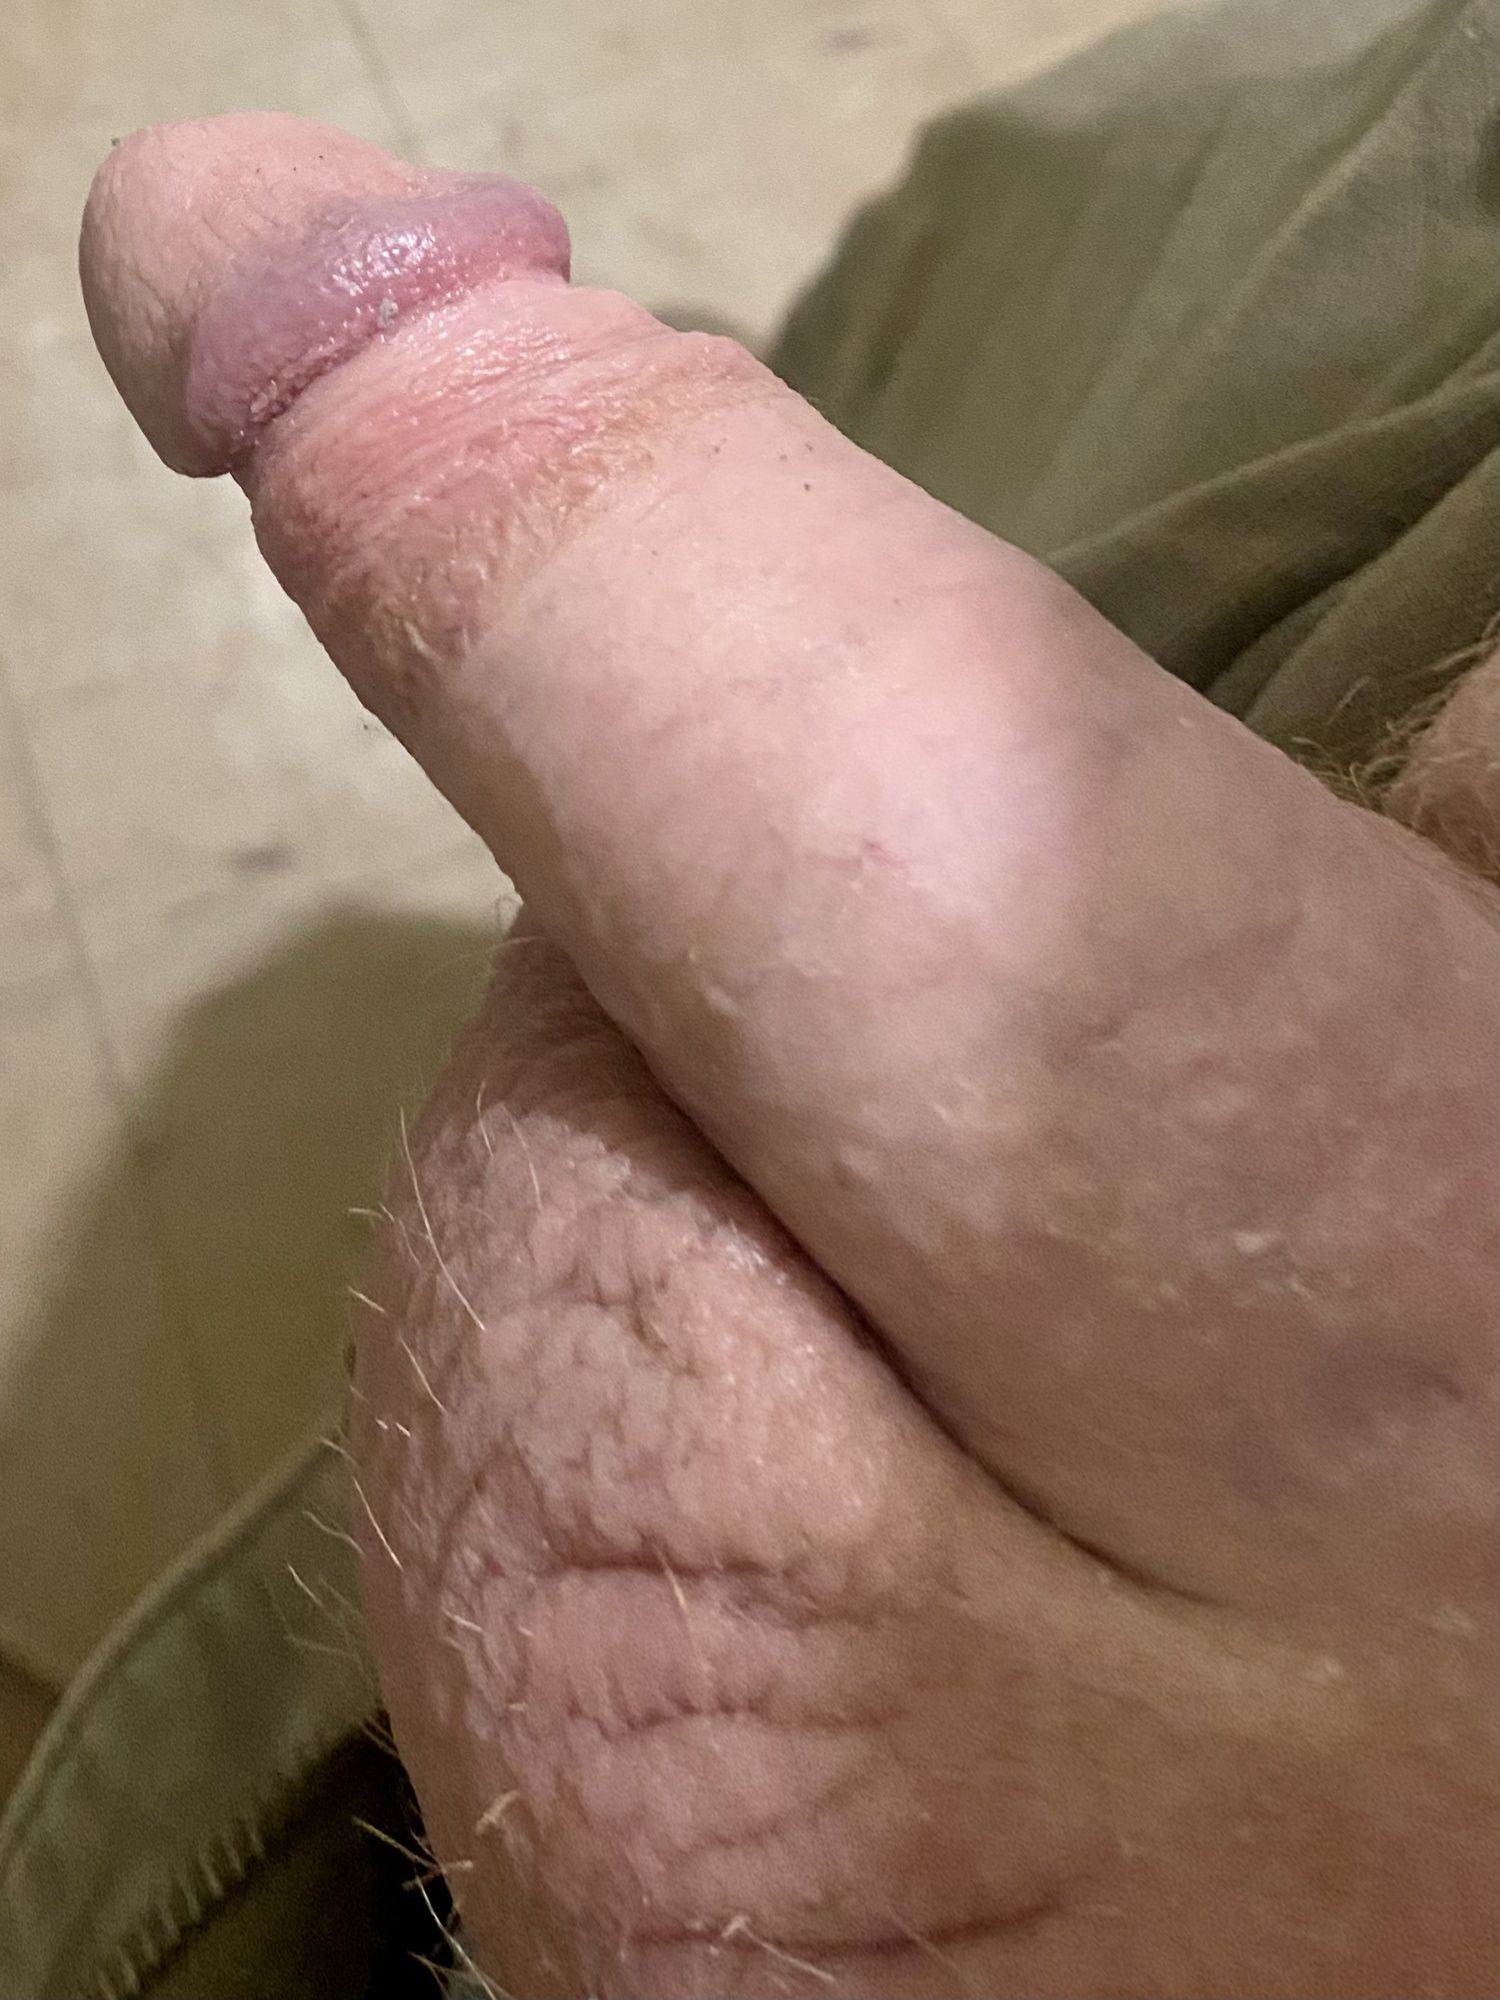 Perfect sized cock